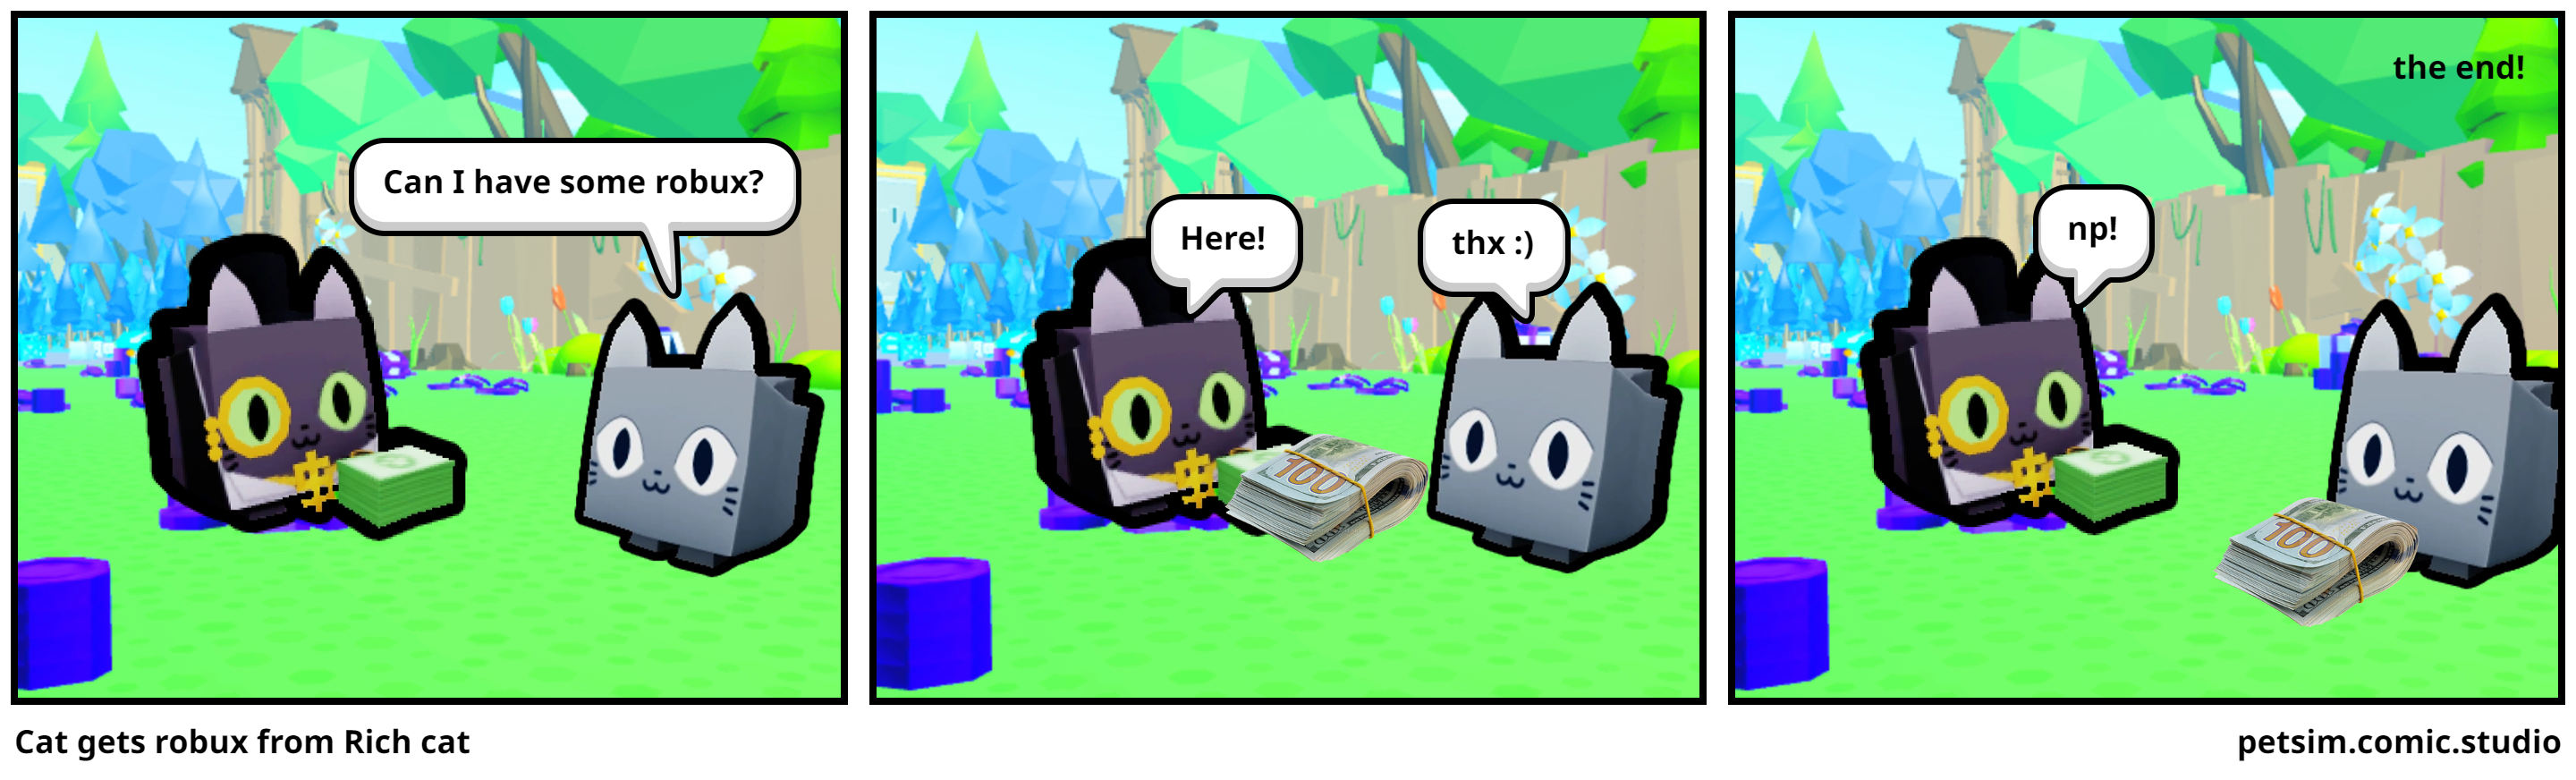 Cat gets robux from Rich cat